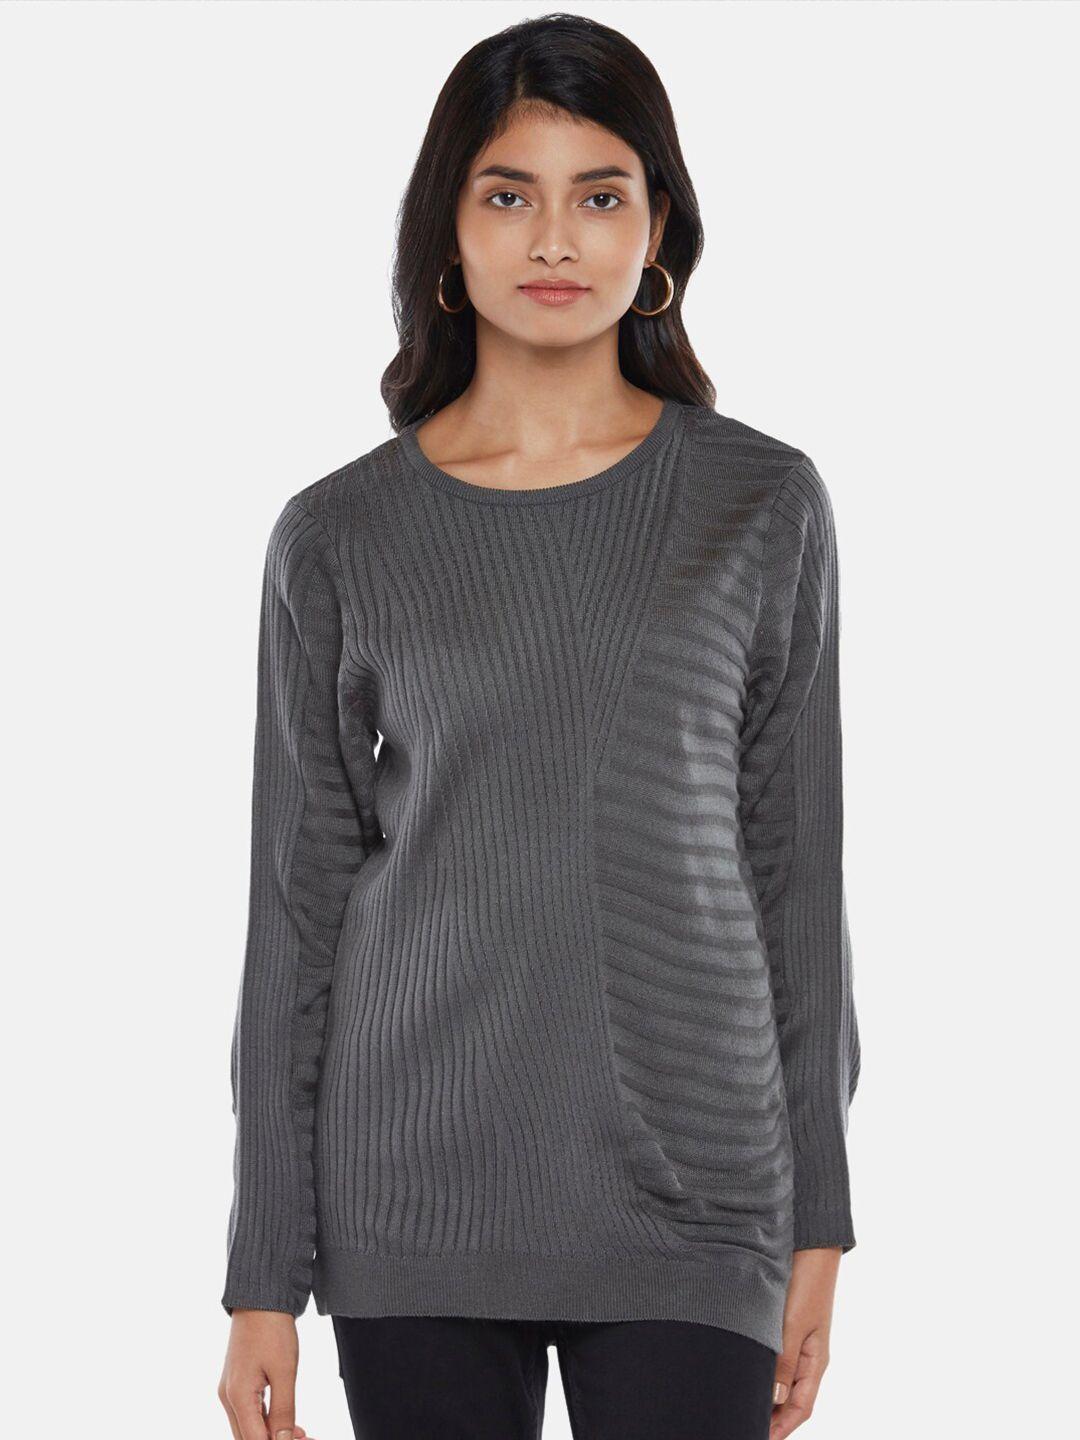 honey by pantaloons women grey cable knit striped pullover sweater